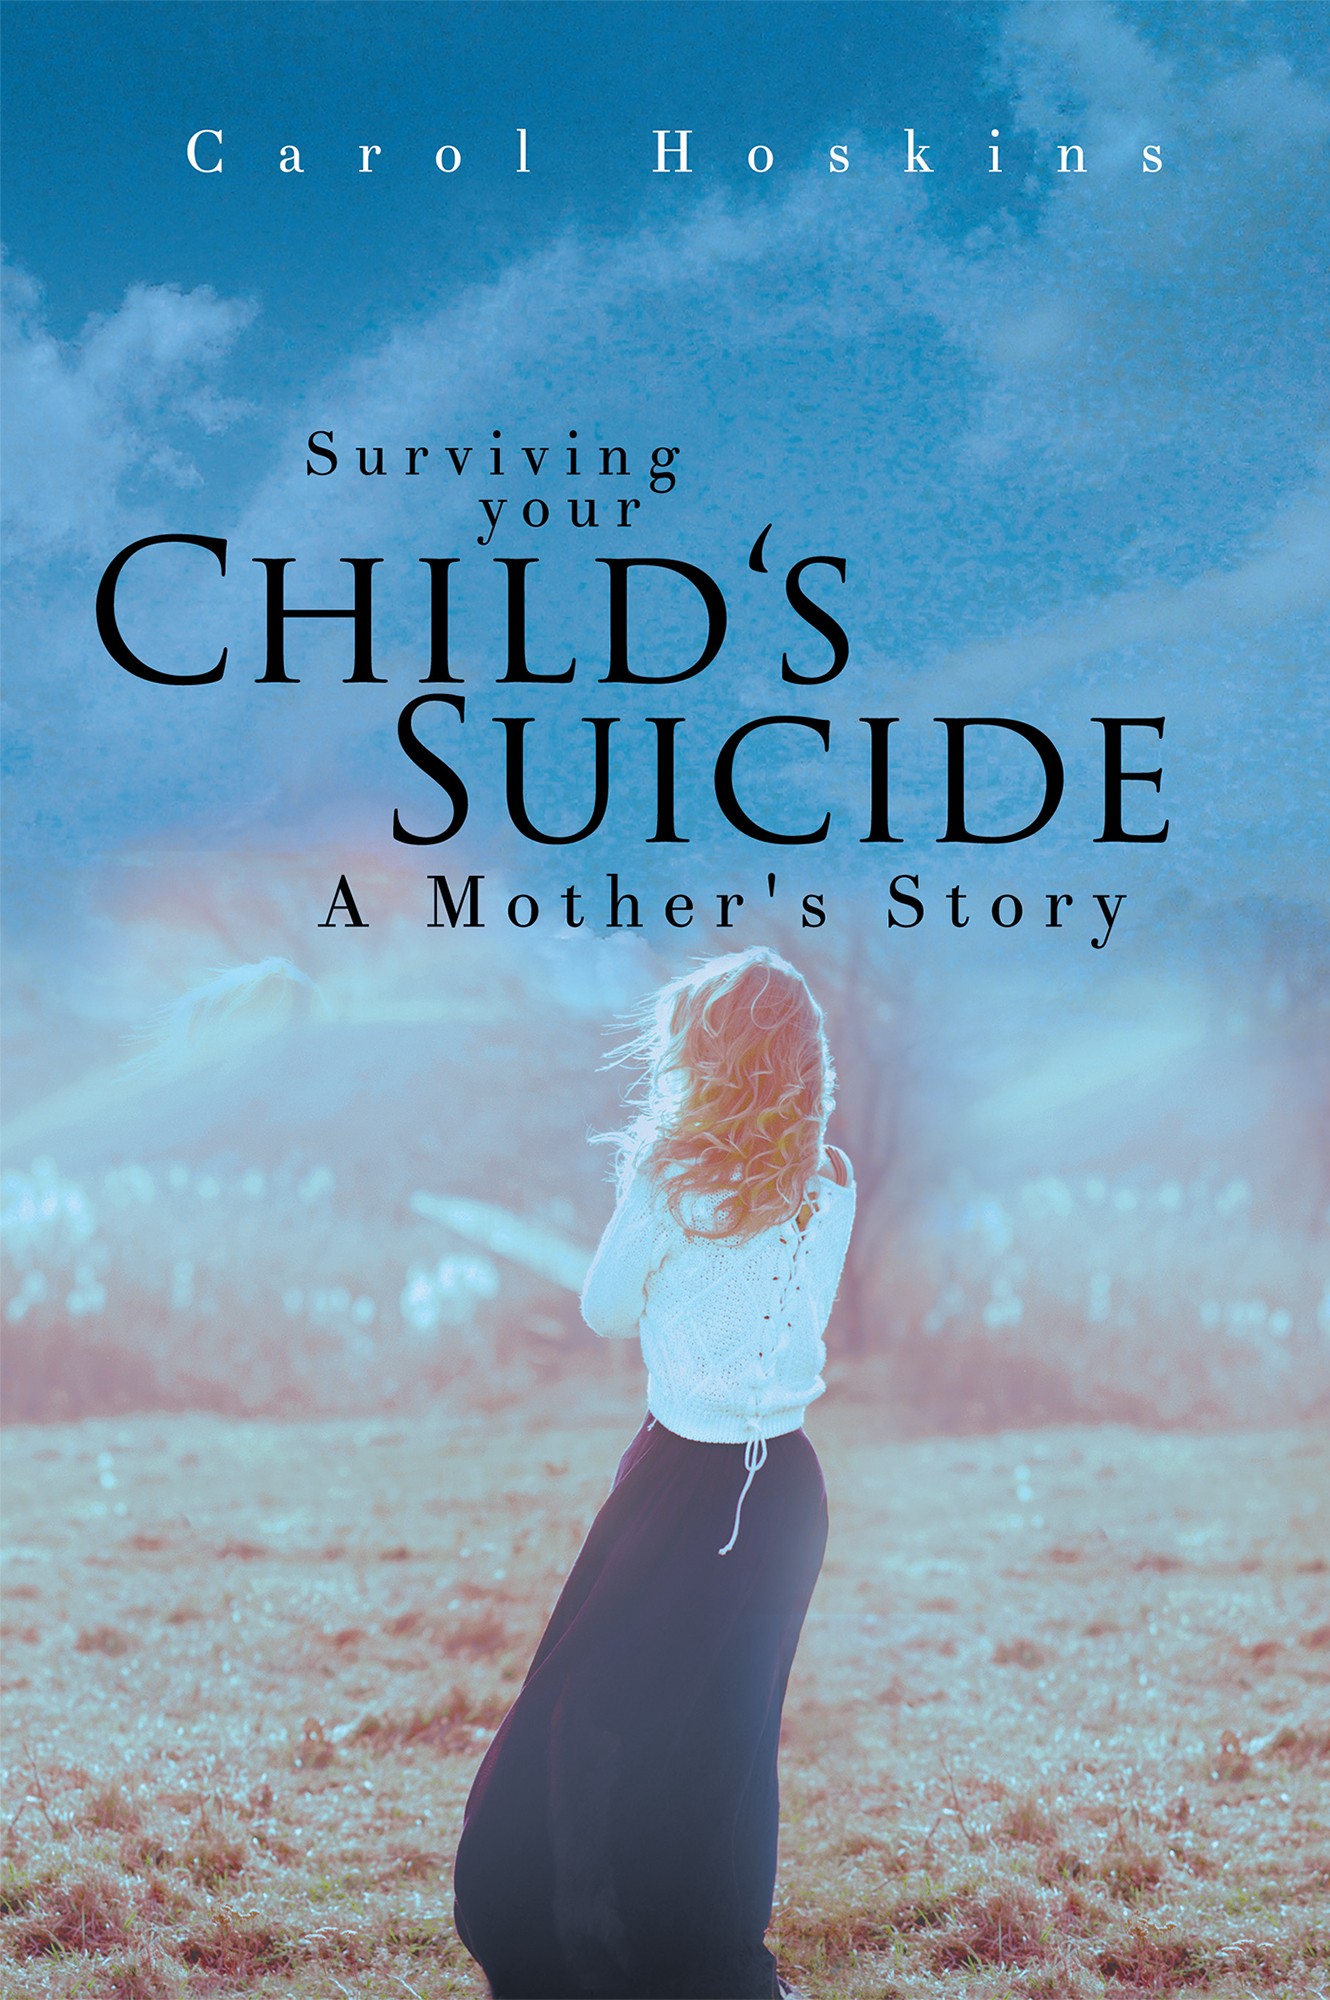 Carol Hoskins’s New Book “Surviving your Child’s Suicide: A Mother’s ...